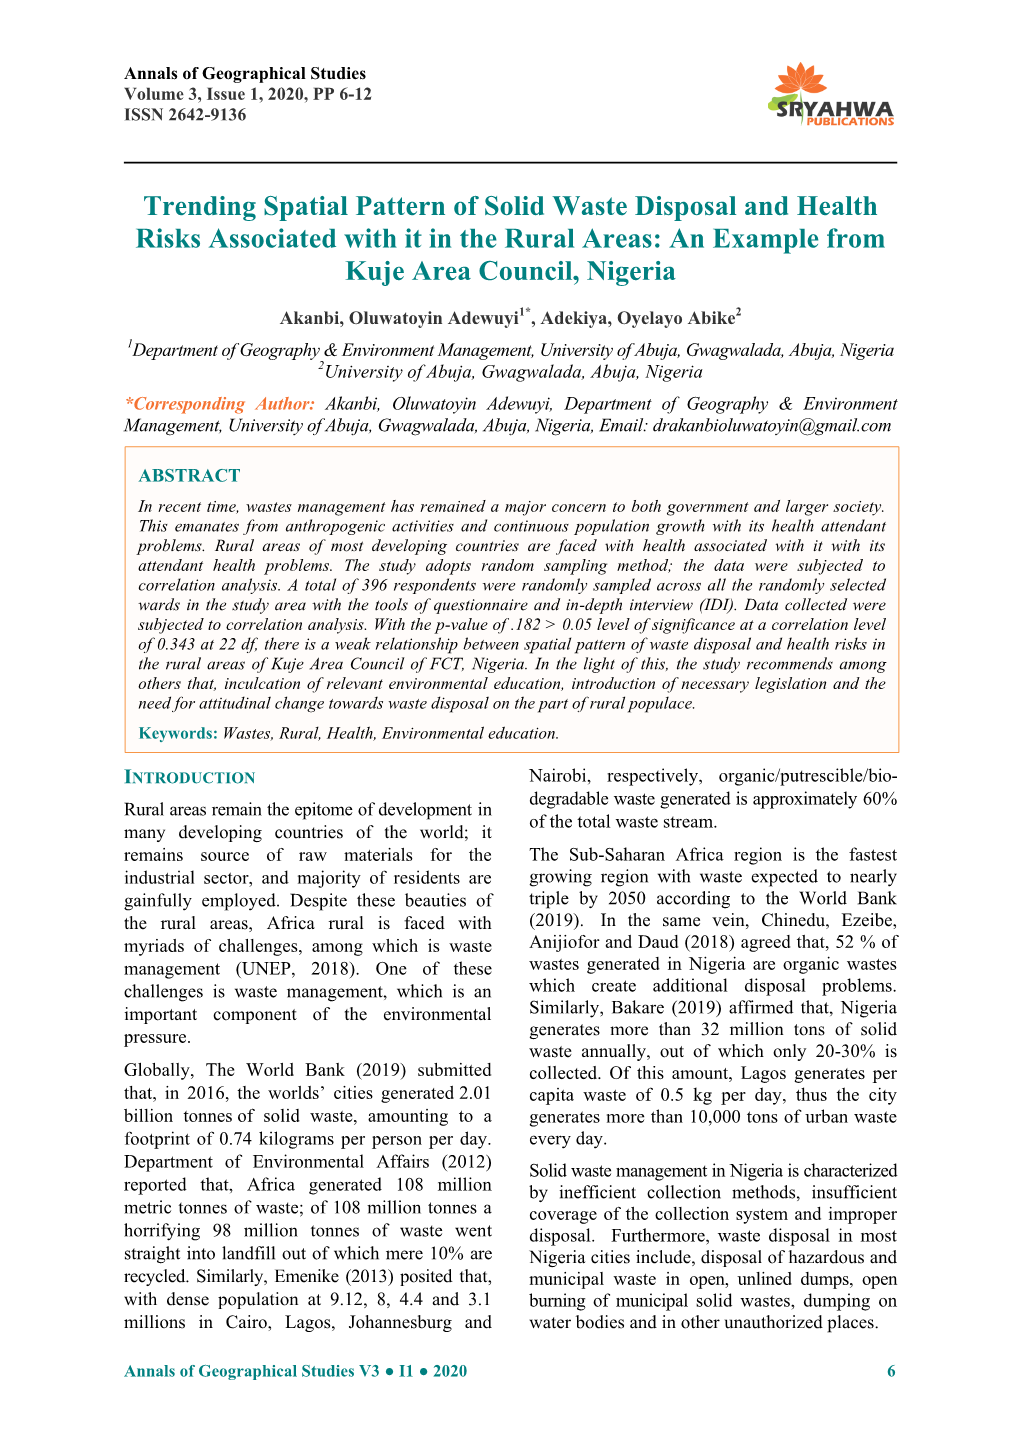 Trending Spatial Pattern of Solid Waste Disposal and Health Risks Associated with It in the Rural Areas: an Example from Kuje Area Council, Nigeria